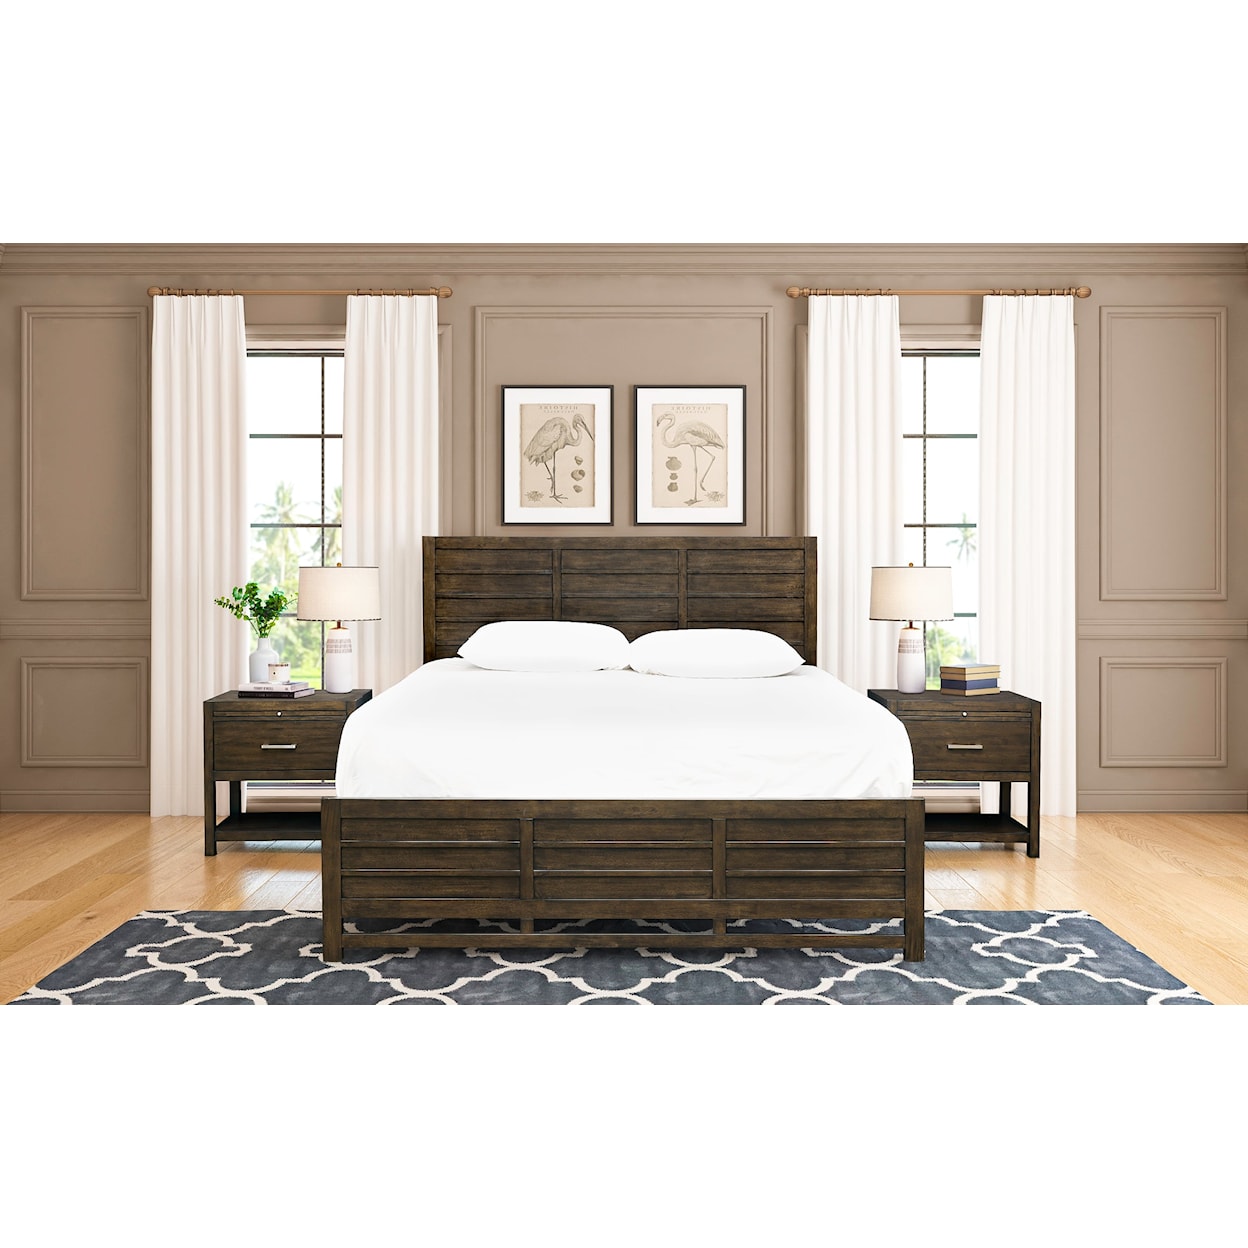 A-A Kendall Queen Panel Bed